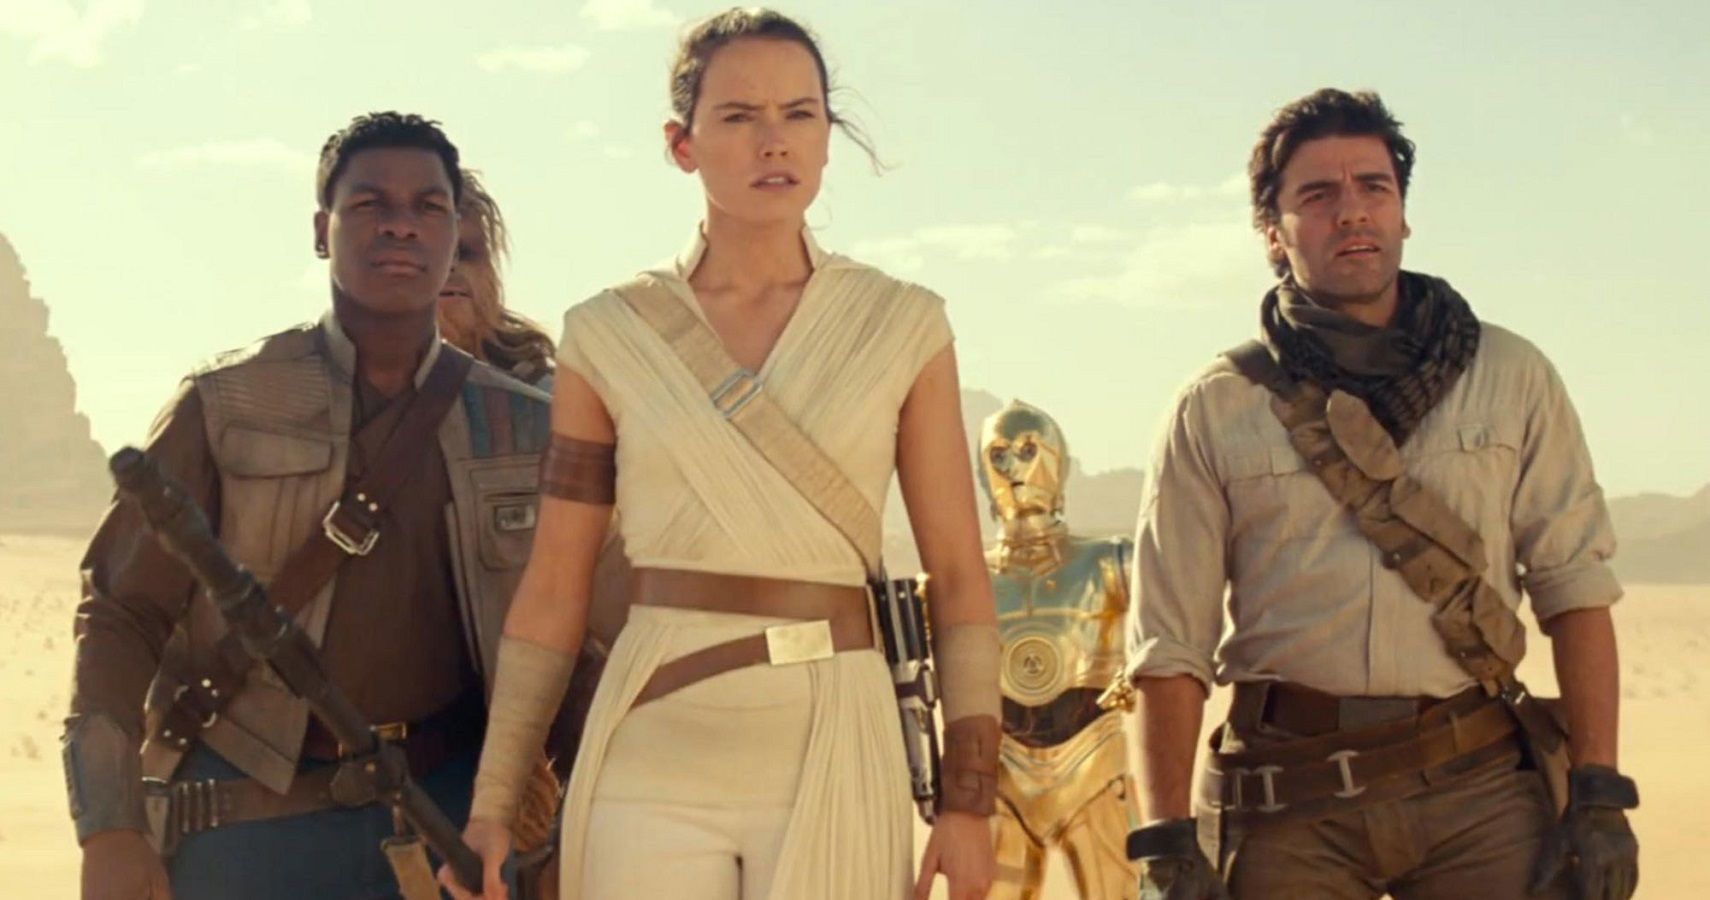 Rise of skywalker rey, poe, fin, and c-3PO